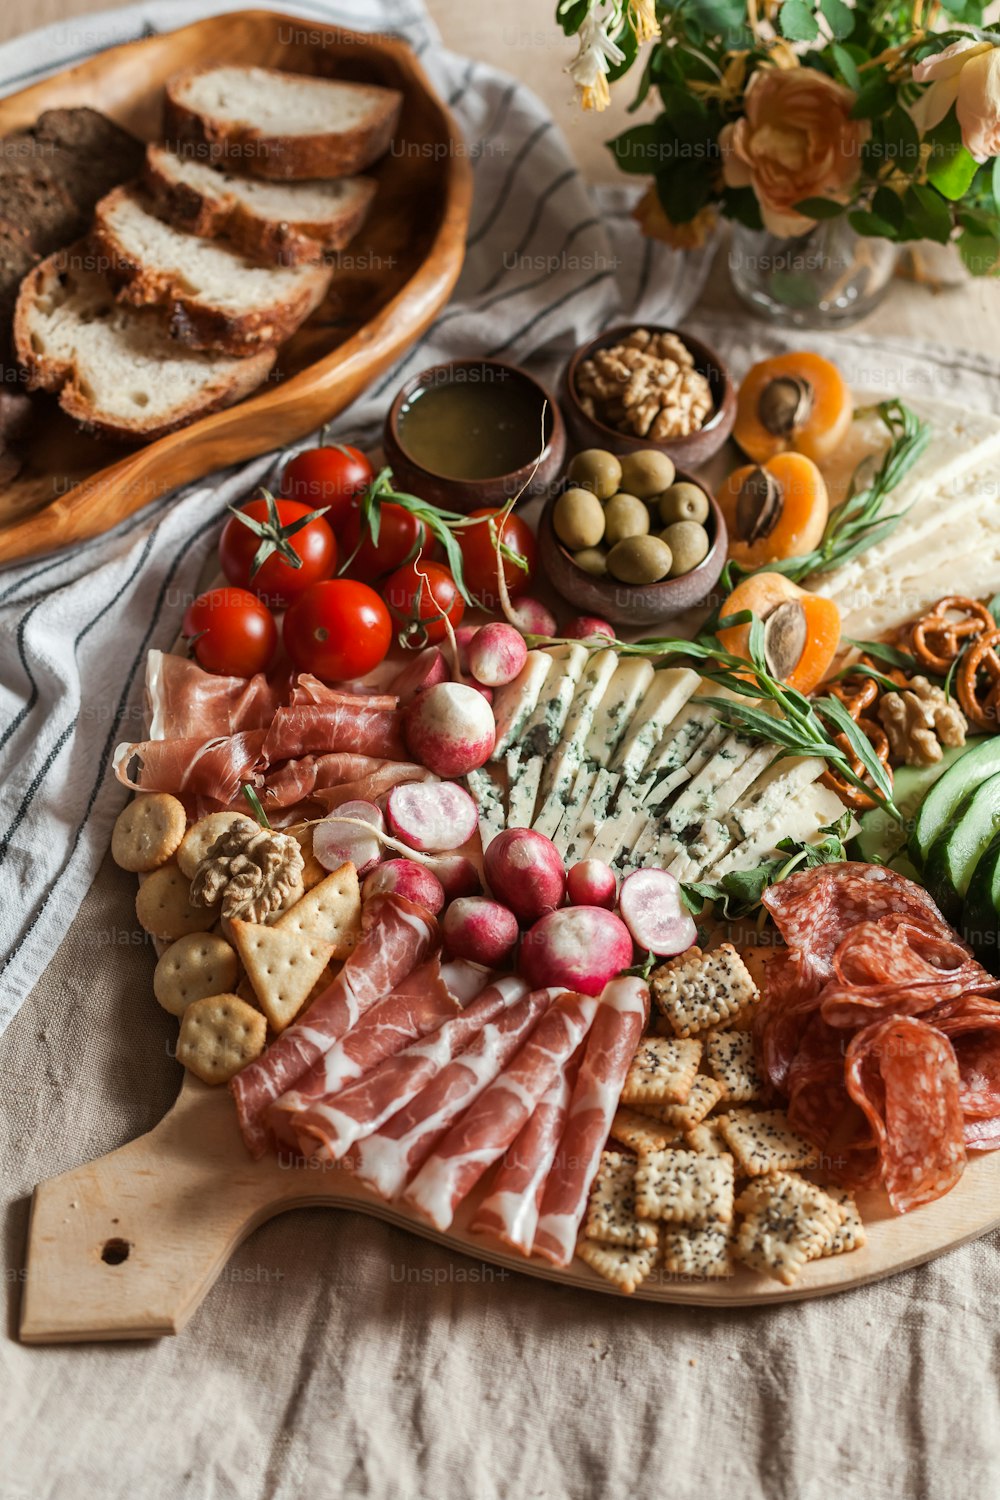 a platter of meats, cheeses, breads, and vegetables